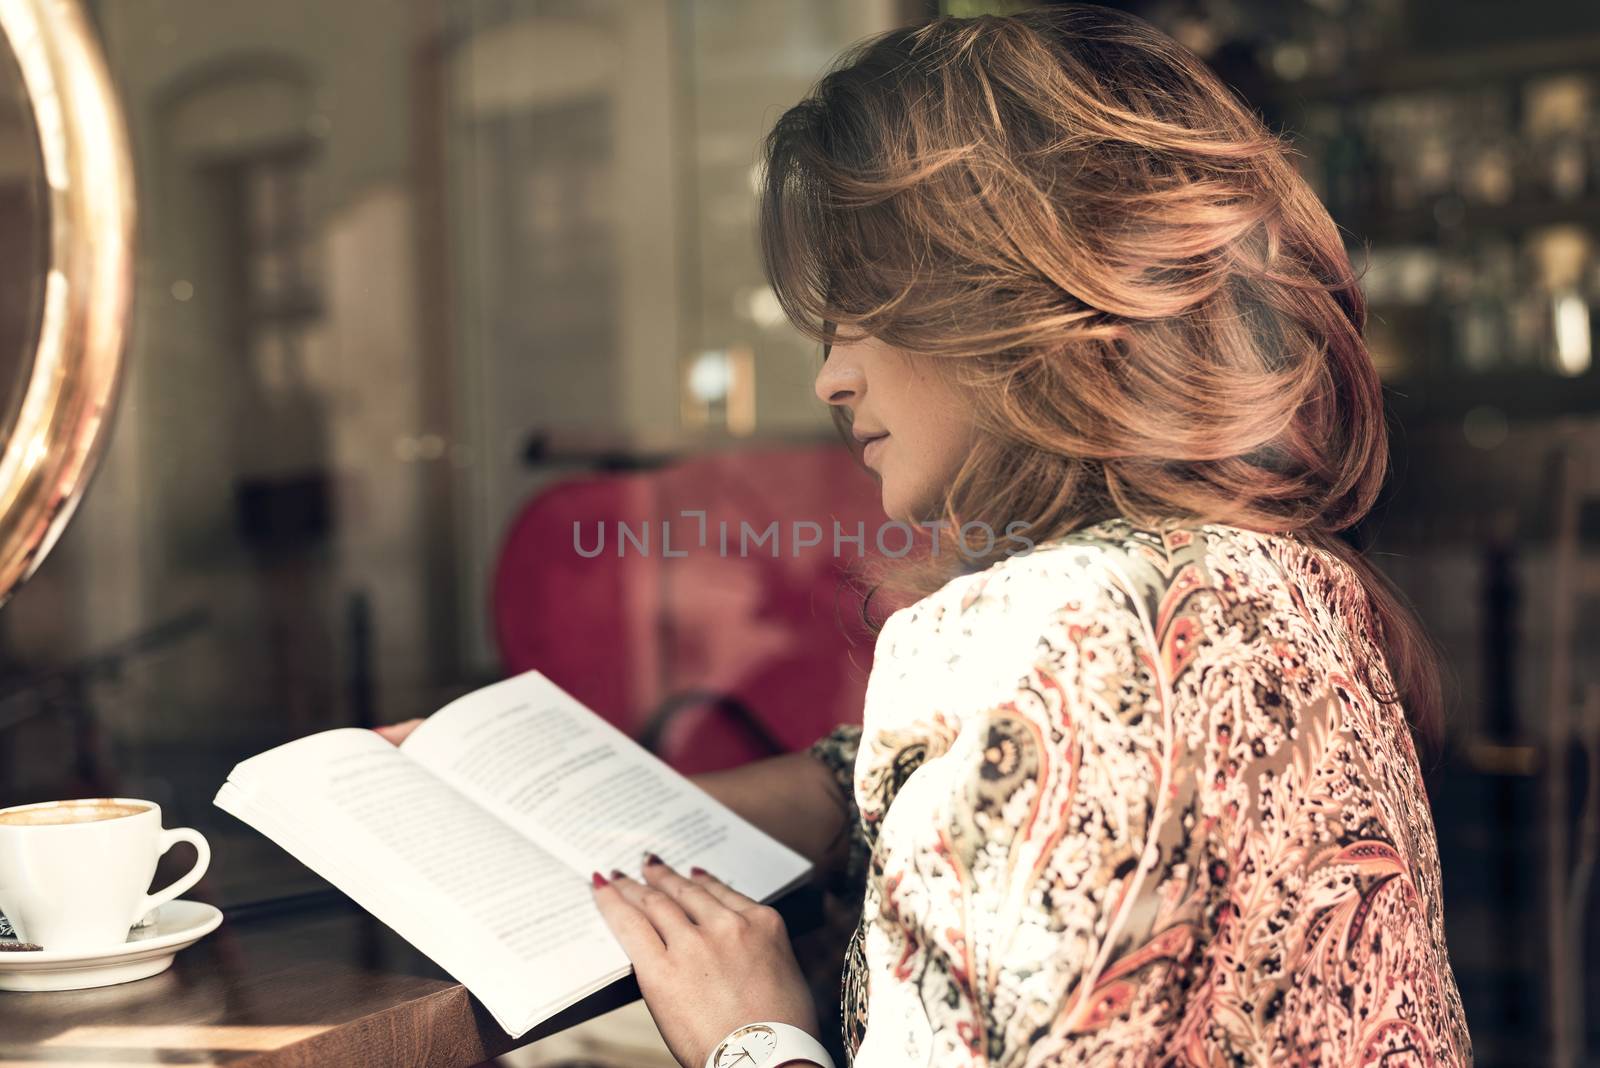 View from outside the window of a cafeteria to a beautiful woman reading a book